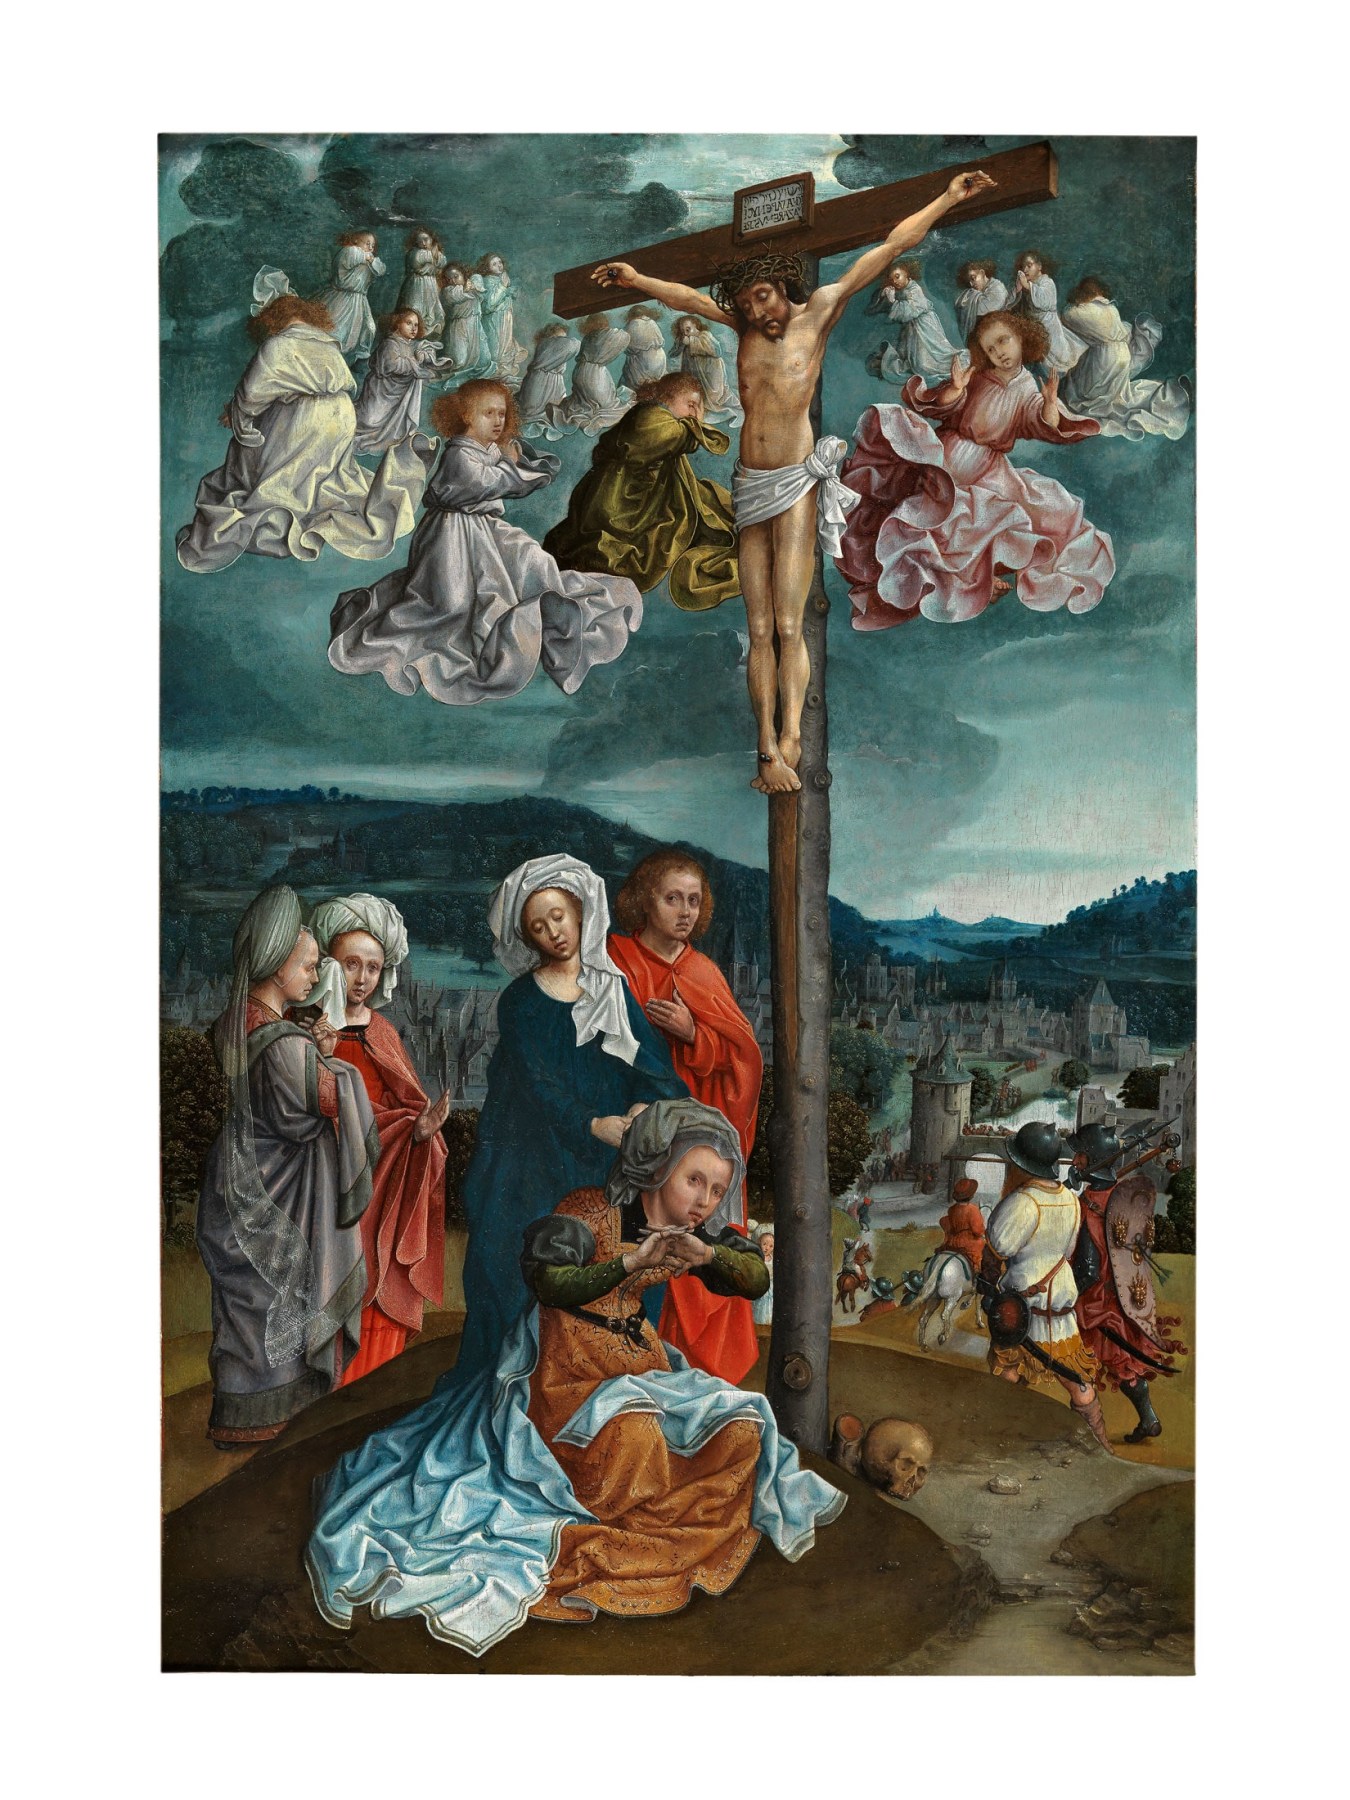 The Crucifixion, Bruges, Southern Netherlands